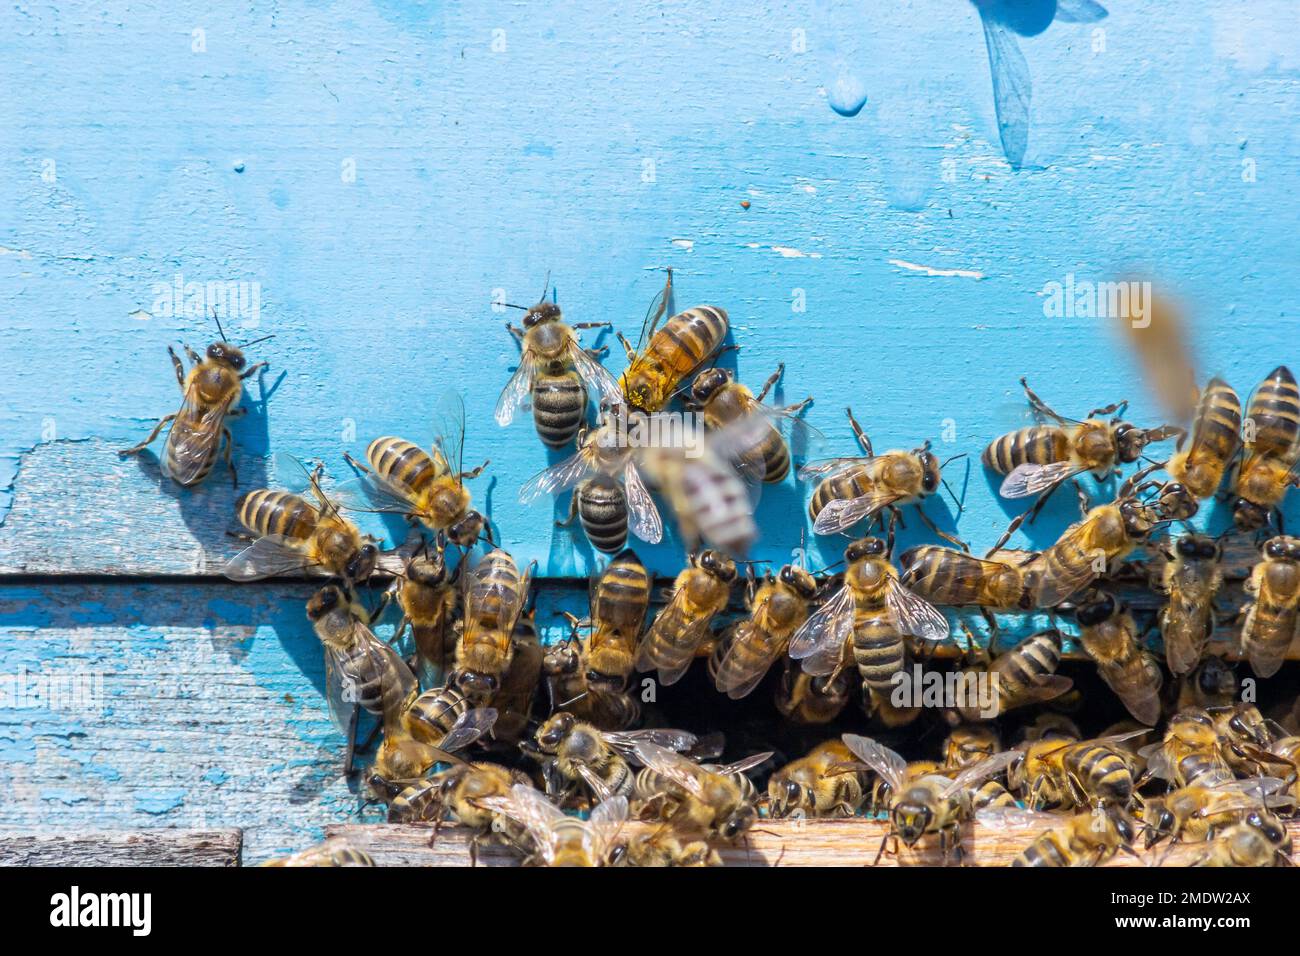 swarm of honey bees flying around beehive. Bees returning from collecting honey fly back to the hive. Honey bees on home apiary, apiculture concept. Stock Photo